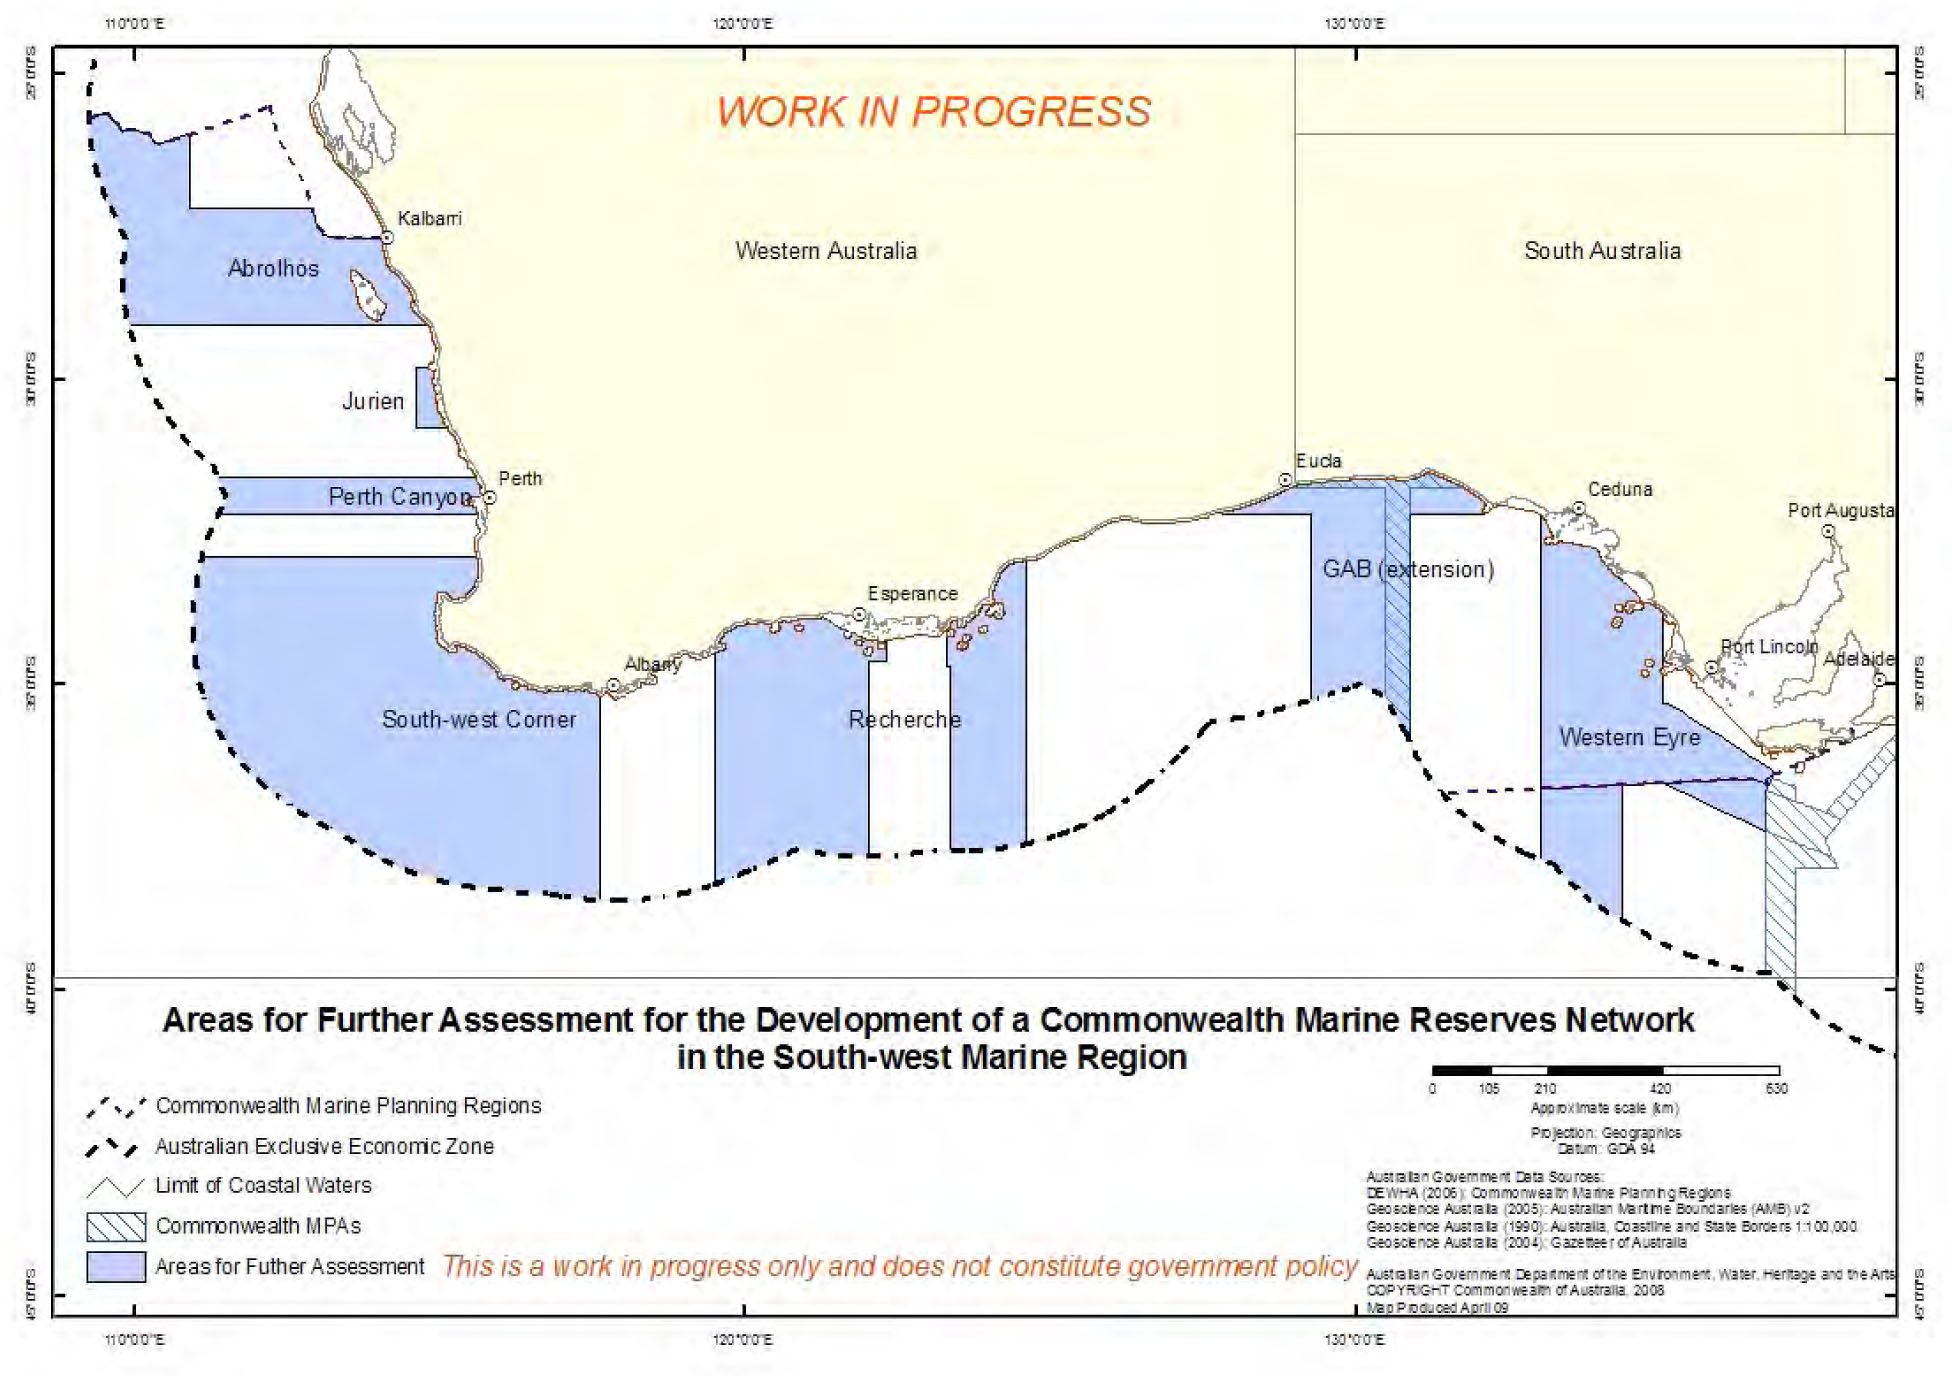 Map showing the Areas for Further Assessment in the South-west Marine Region